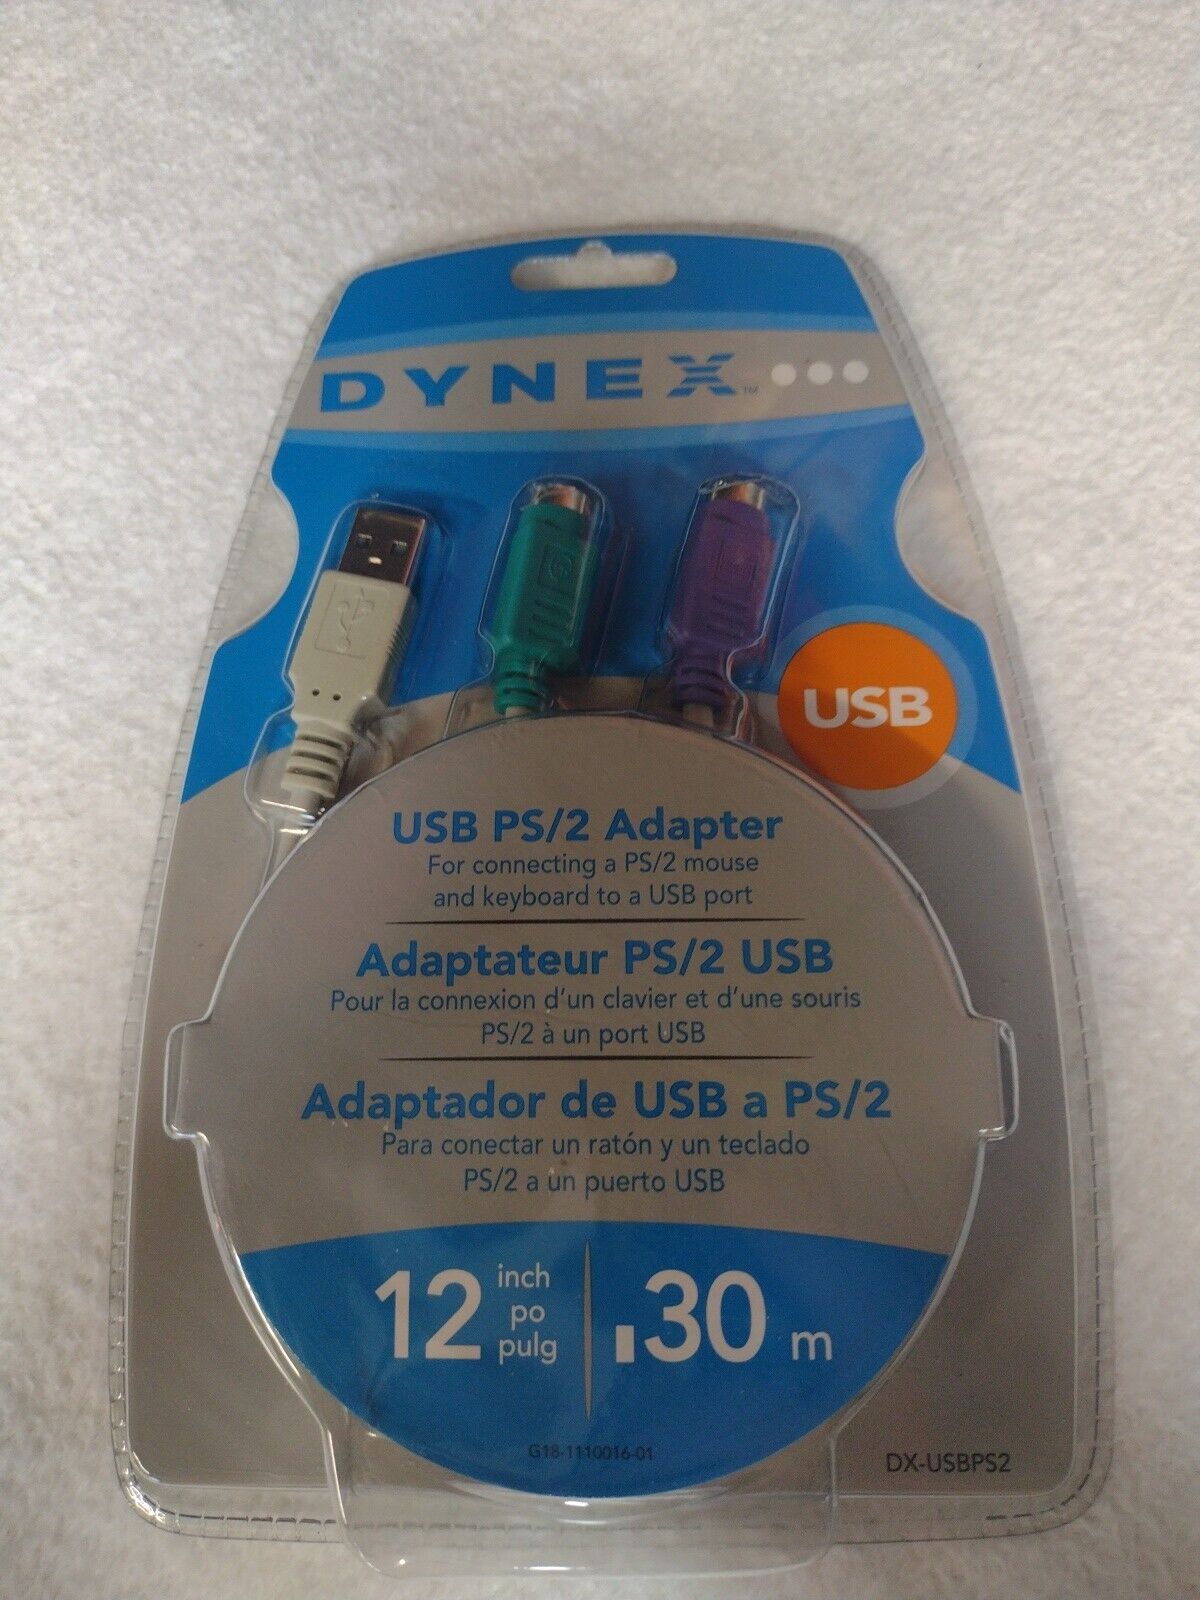  Dynex DX-USBPS2 USB-to-PS/2 KVM Mouse Keyboard Port Adapter Cable Converter